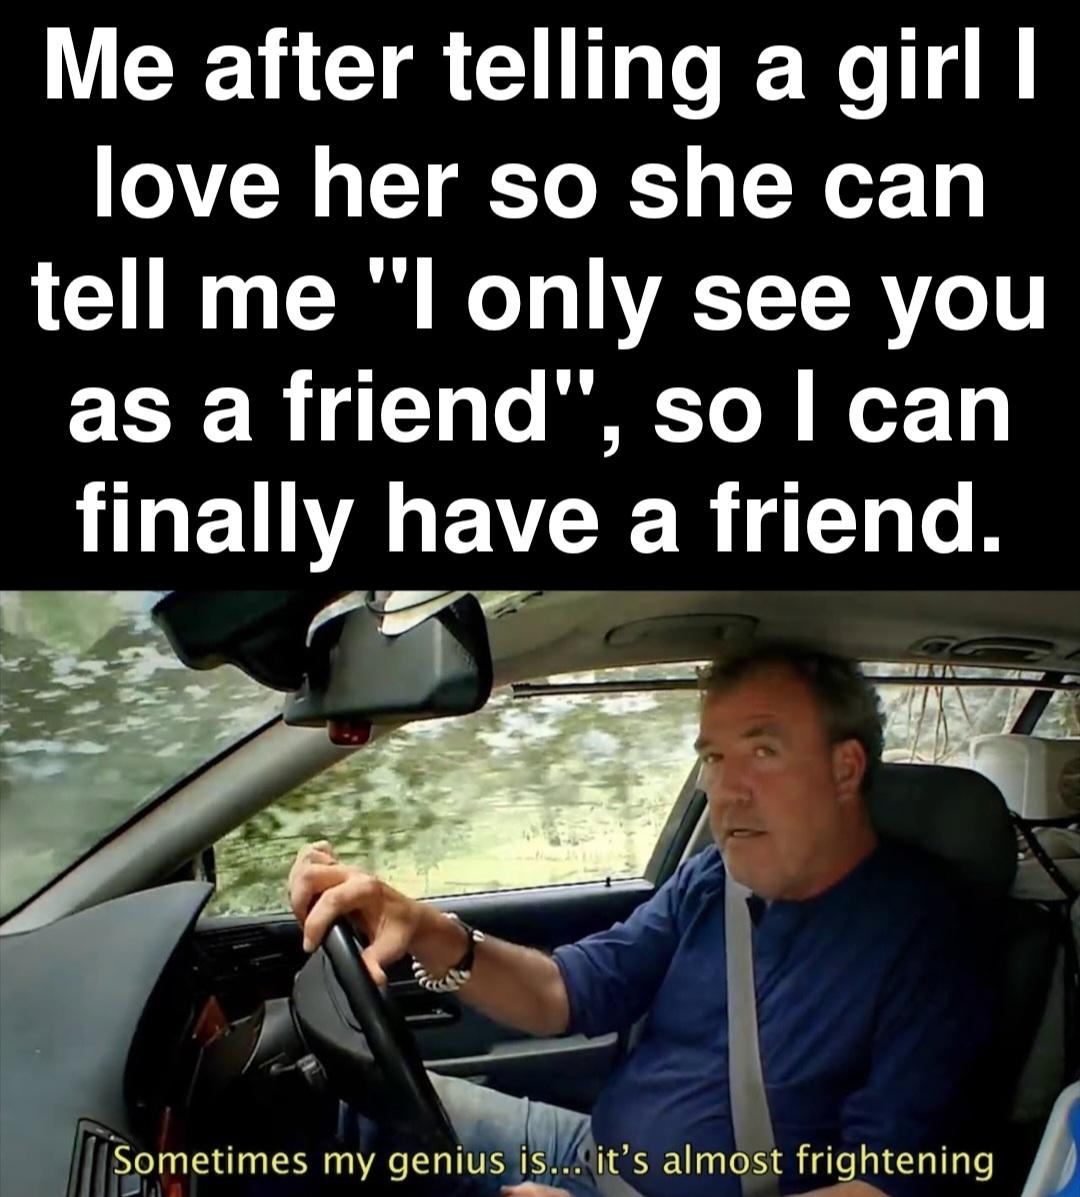 funny memes - dank memes - sometimes  genius is almost frightening episode - Me after telling a girl | love her so she can tell me